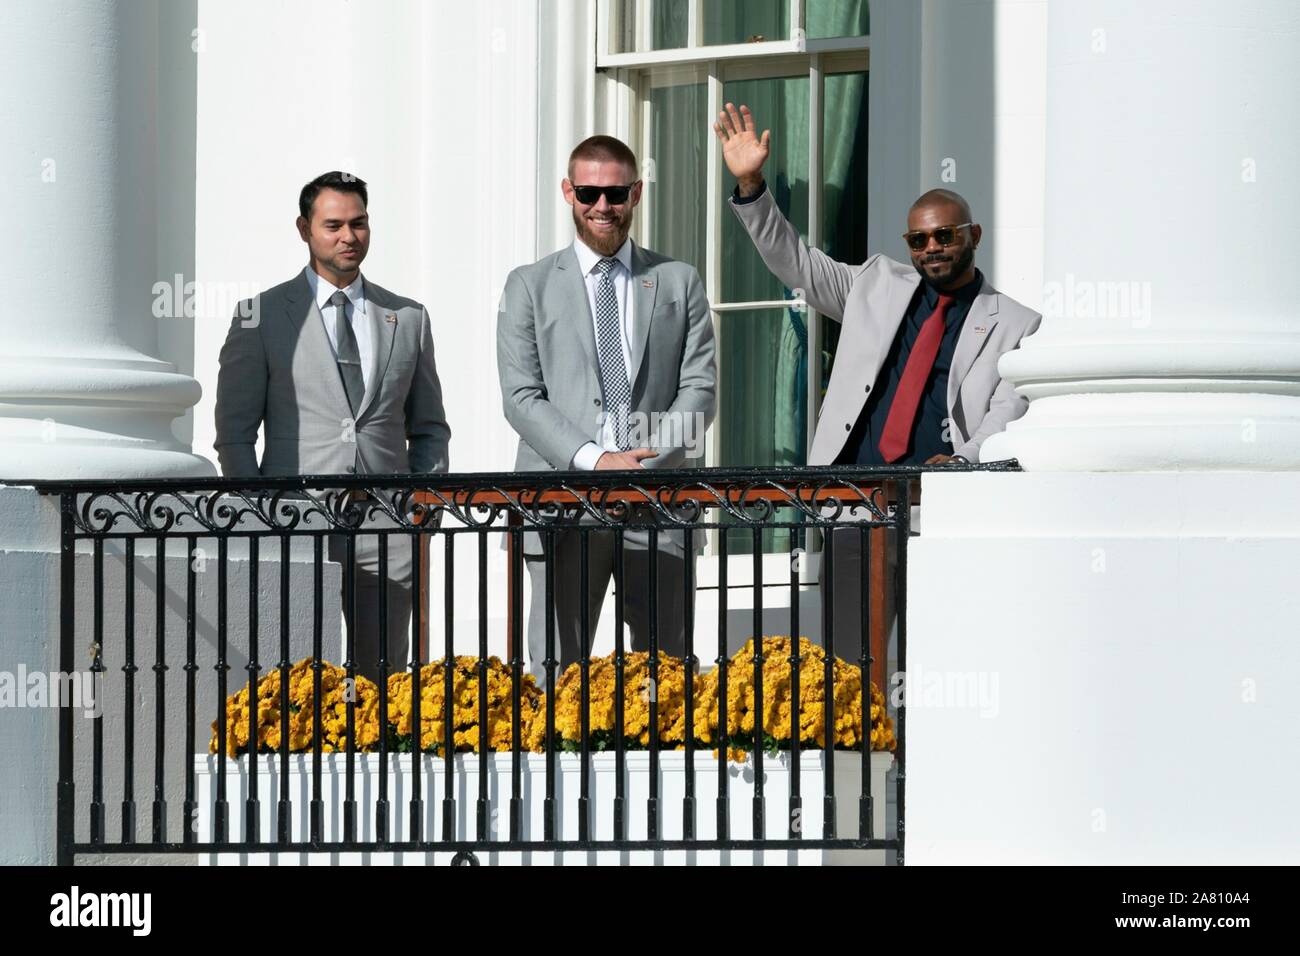 Washington, United States of America. 04 November, 2019. Washington Nationals infielder Howie Kendrick, right, waves alongside fellow teammates on the South Portico balcony of the White House November 4, 2019 in Washington, DC. The 2019 Baseball World Series Champions attended an event in their honor by U.S. President Donald Trump to celebrate their victory.  Credit: Andrea Hanks/White House Photo/Alamy Live News Stock Photo